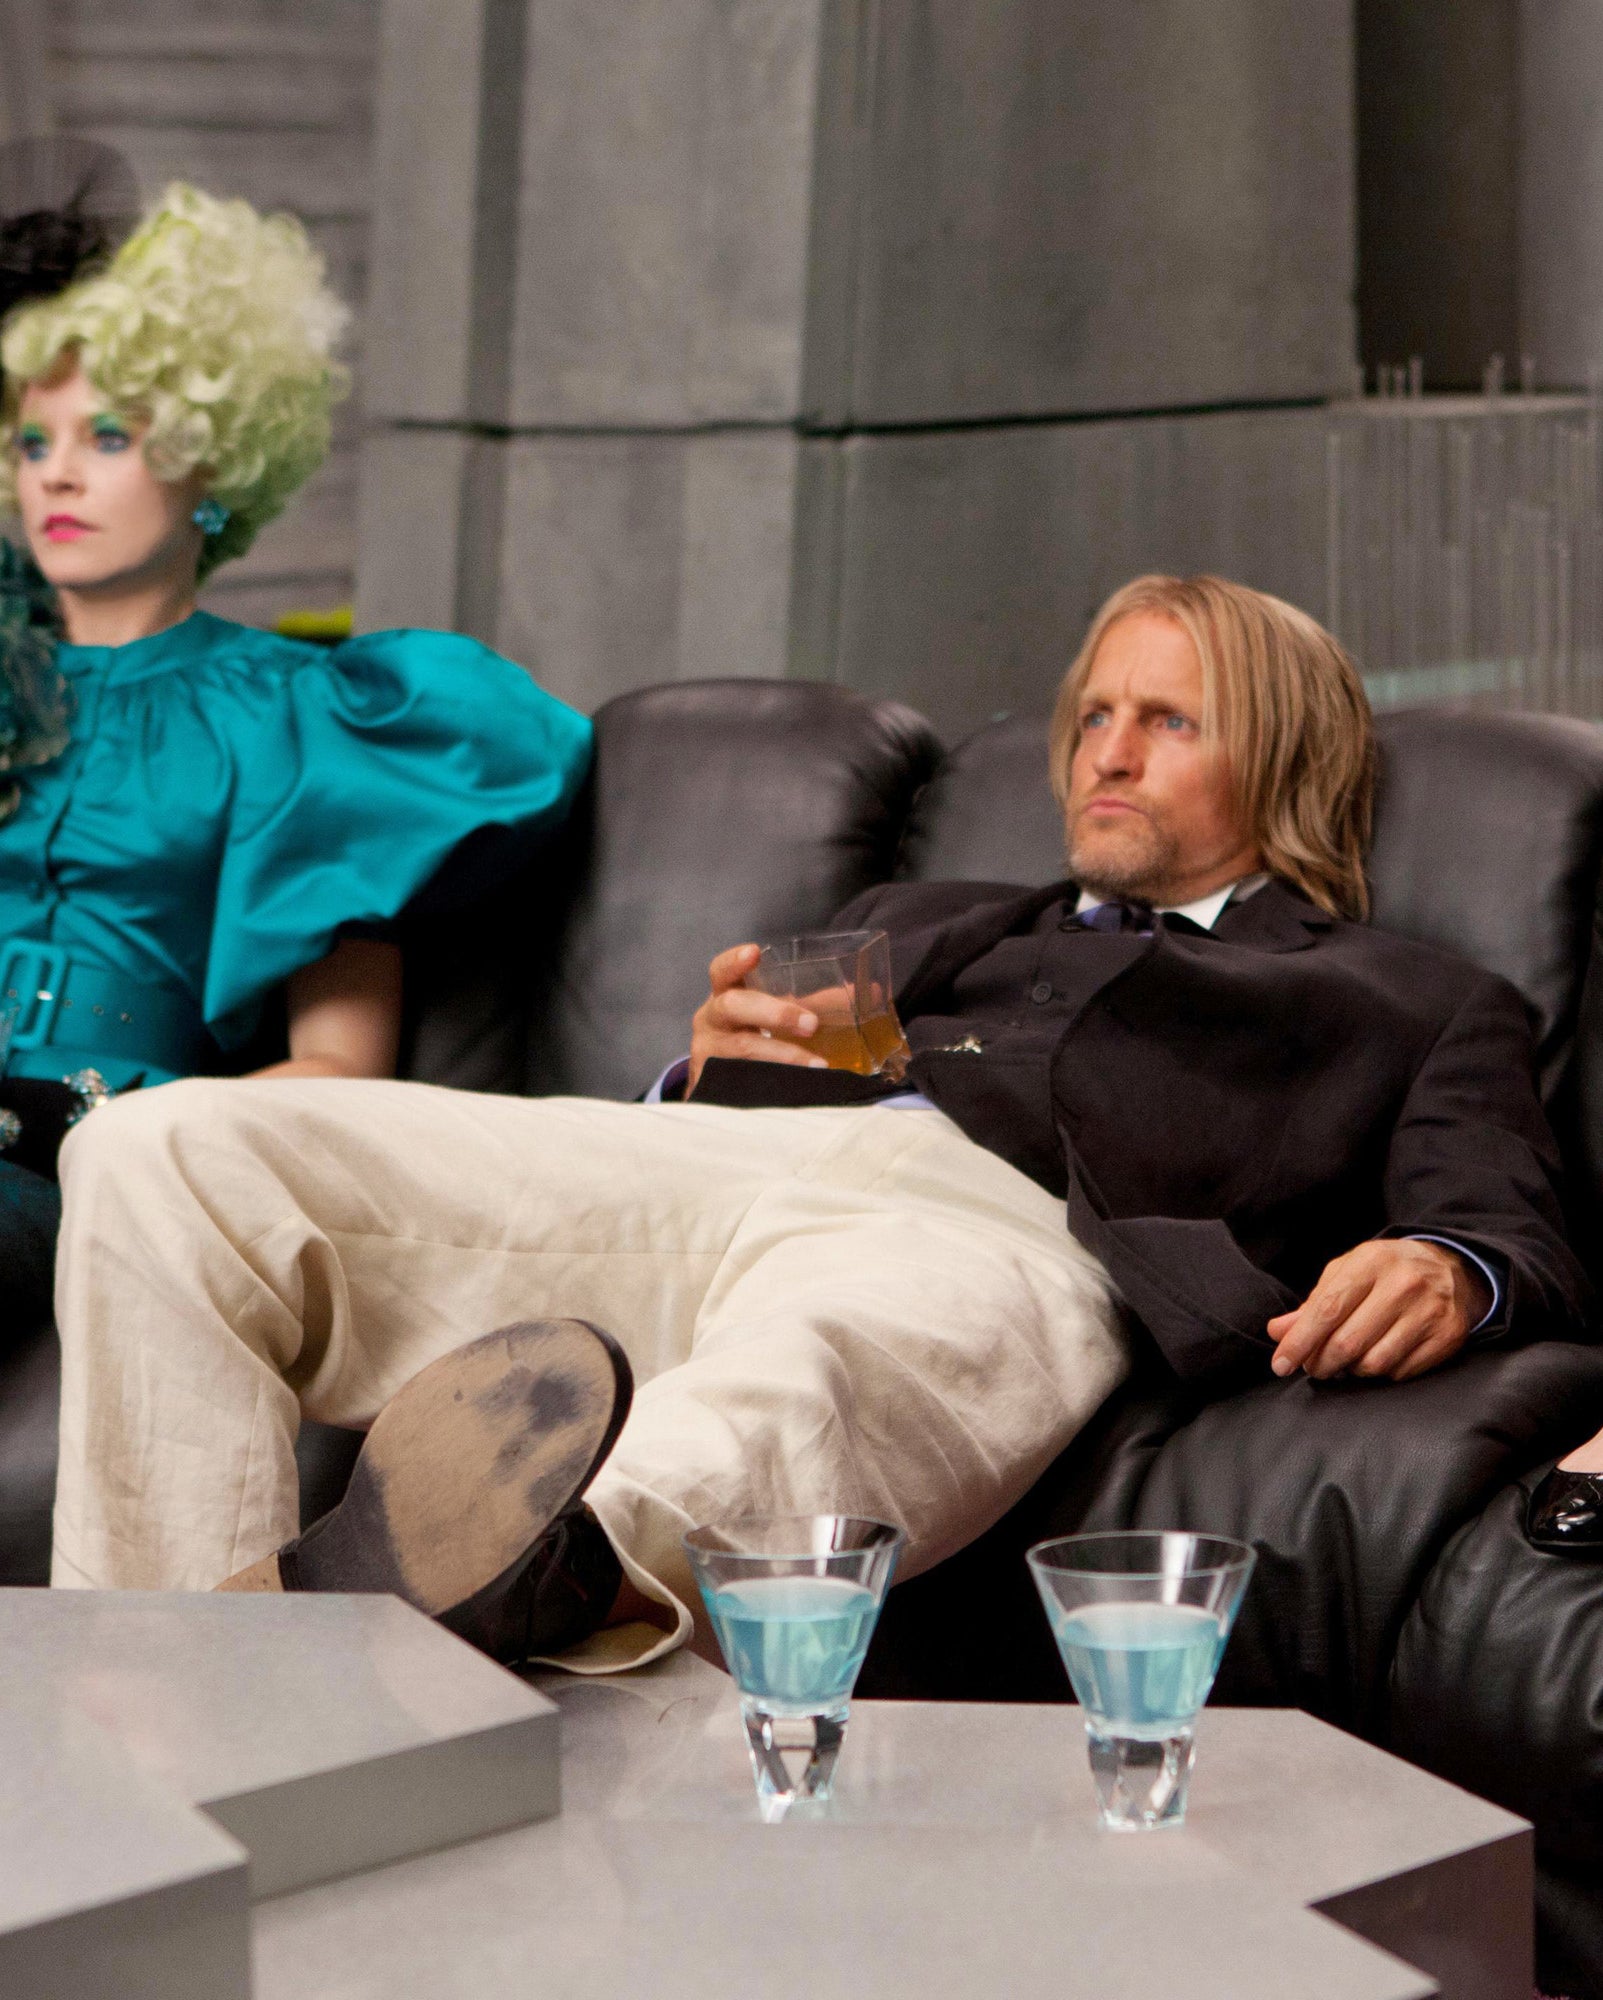 Haymitch in linen pants and a rumpled suit holding a drink